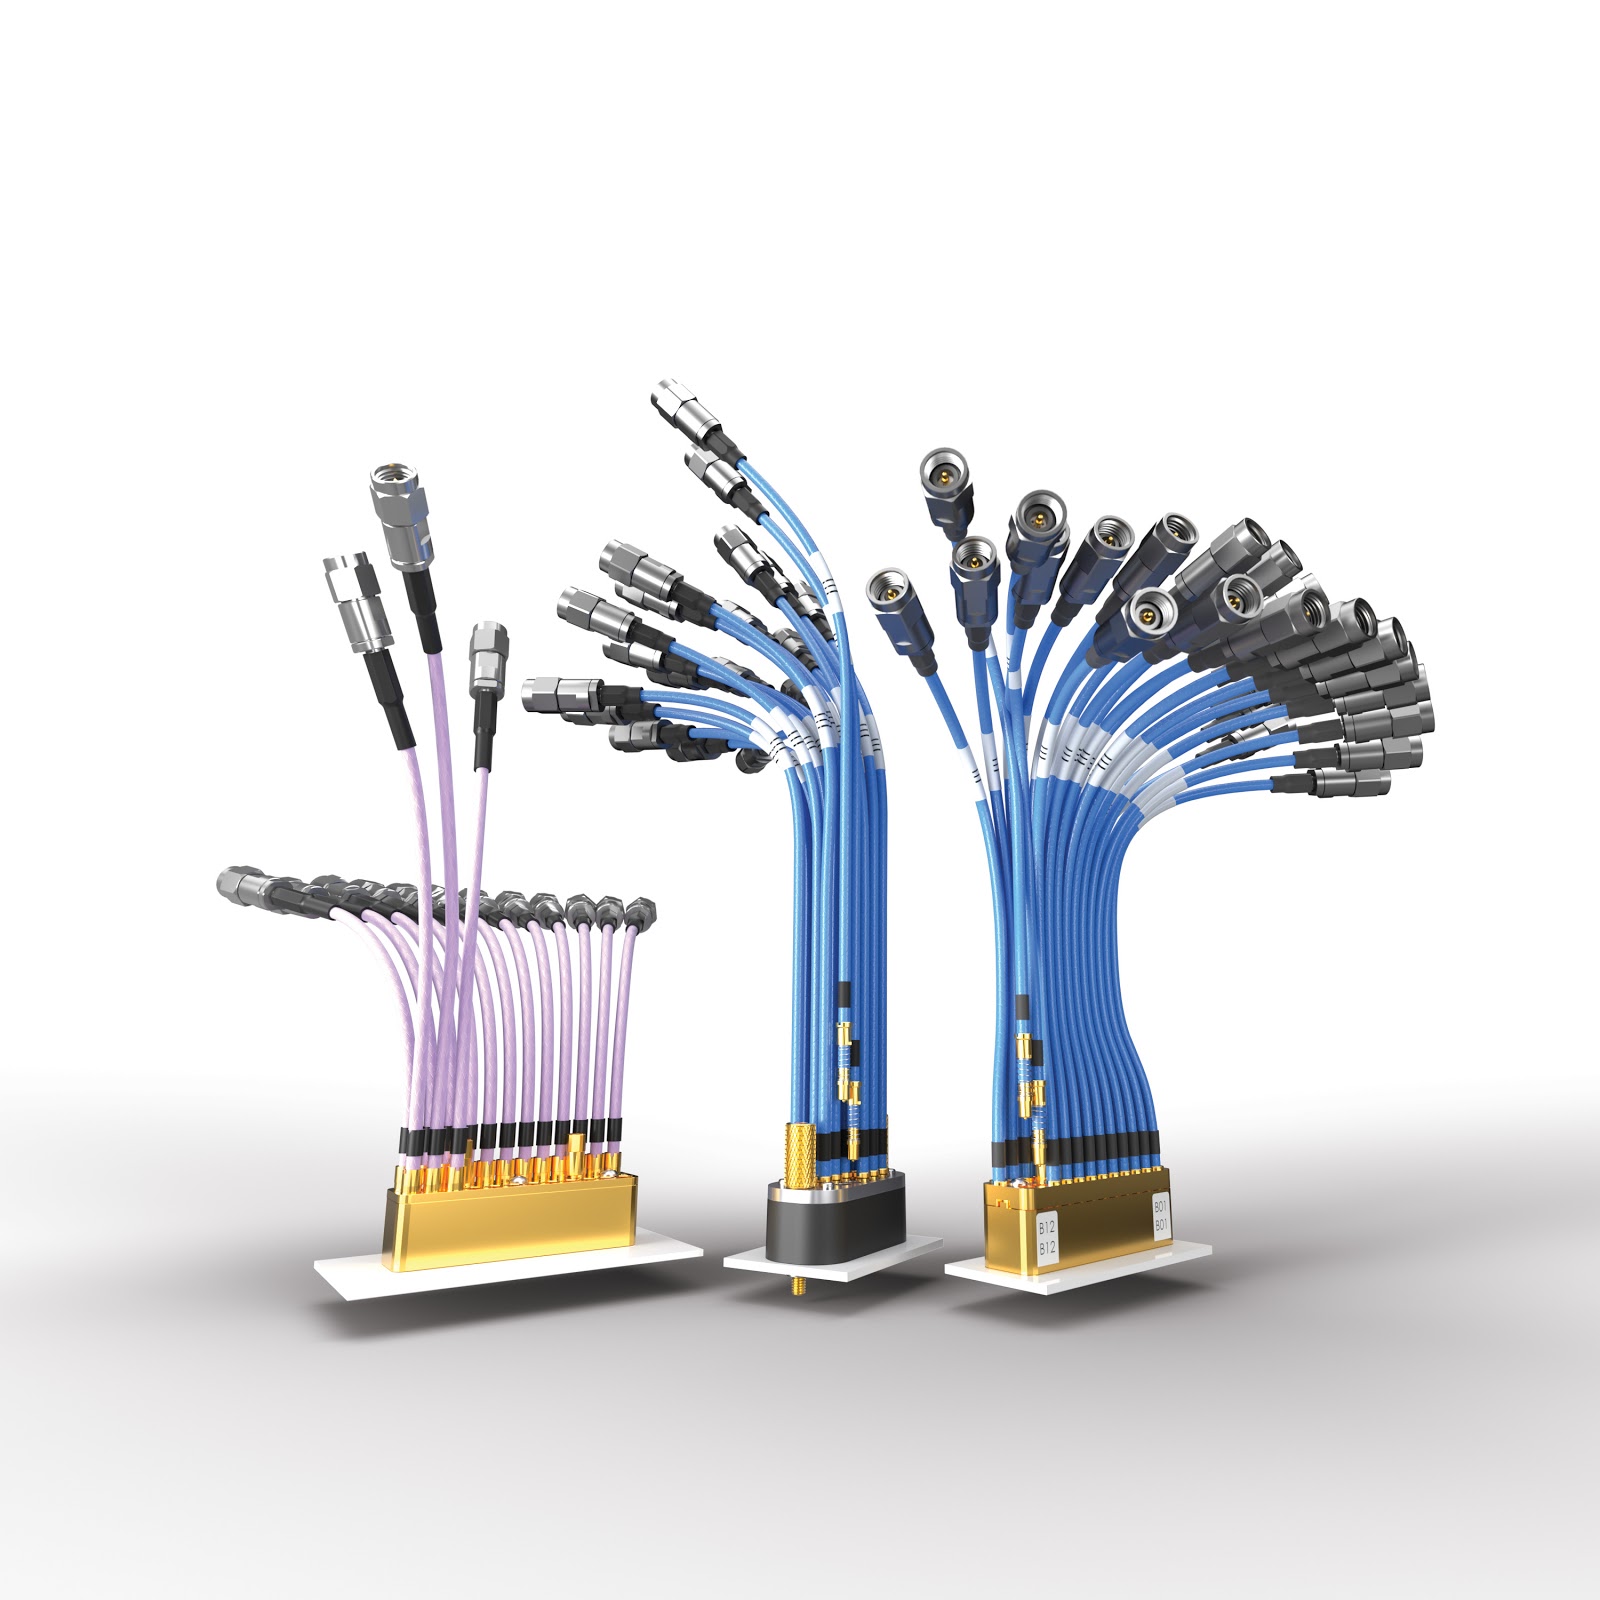 Multiple rendered images of Samtec BullsEye BE70 connector systems capable of 70GHz of bandwidth. Image courtesy of Samtec, Inc.